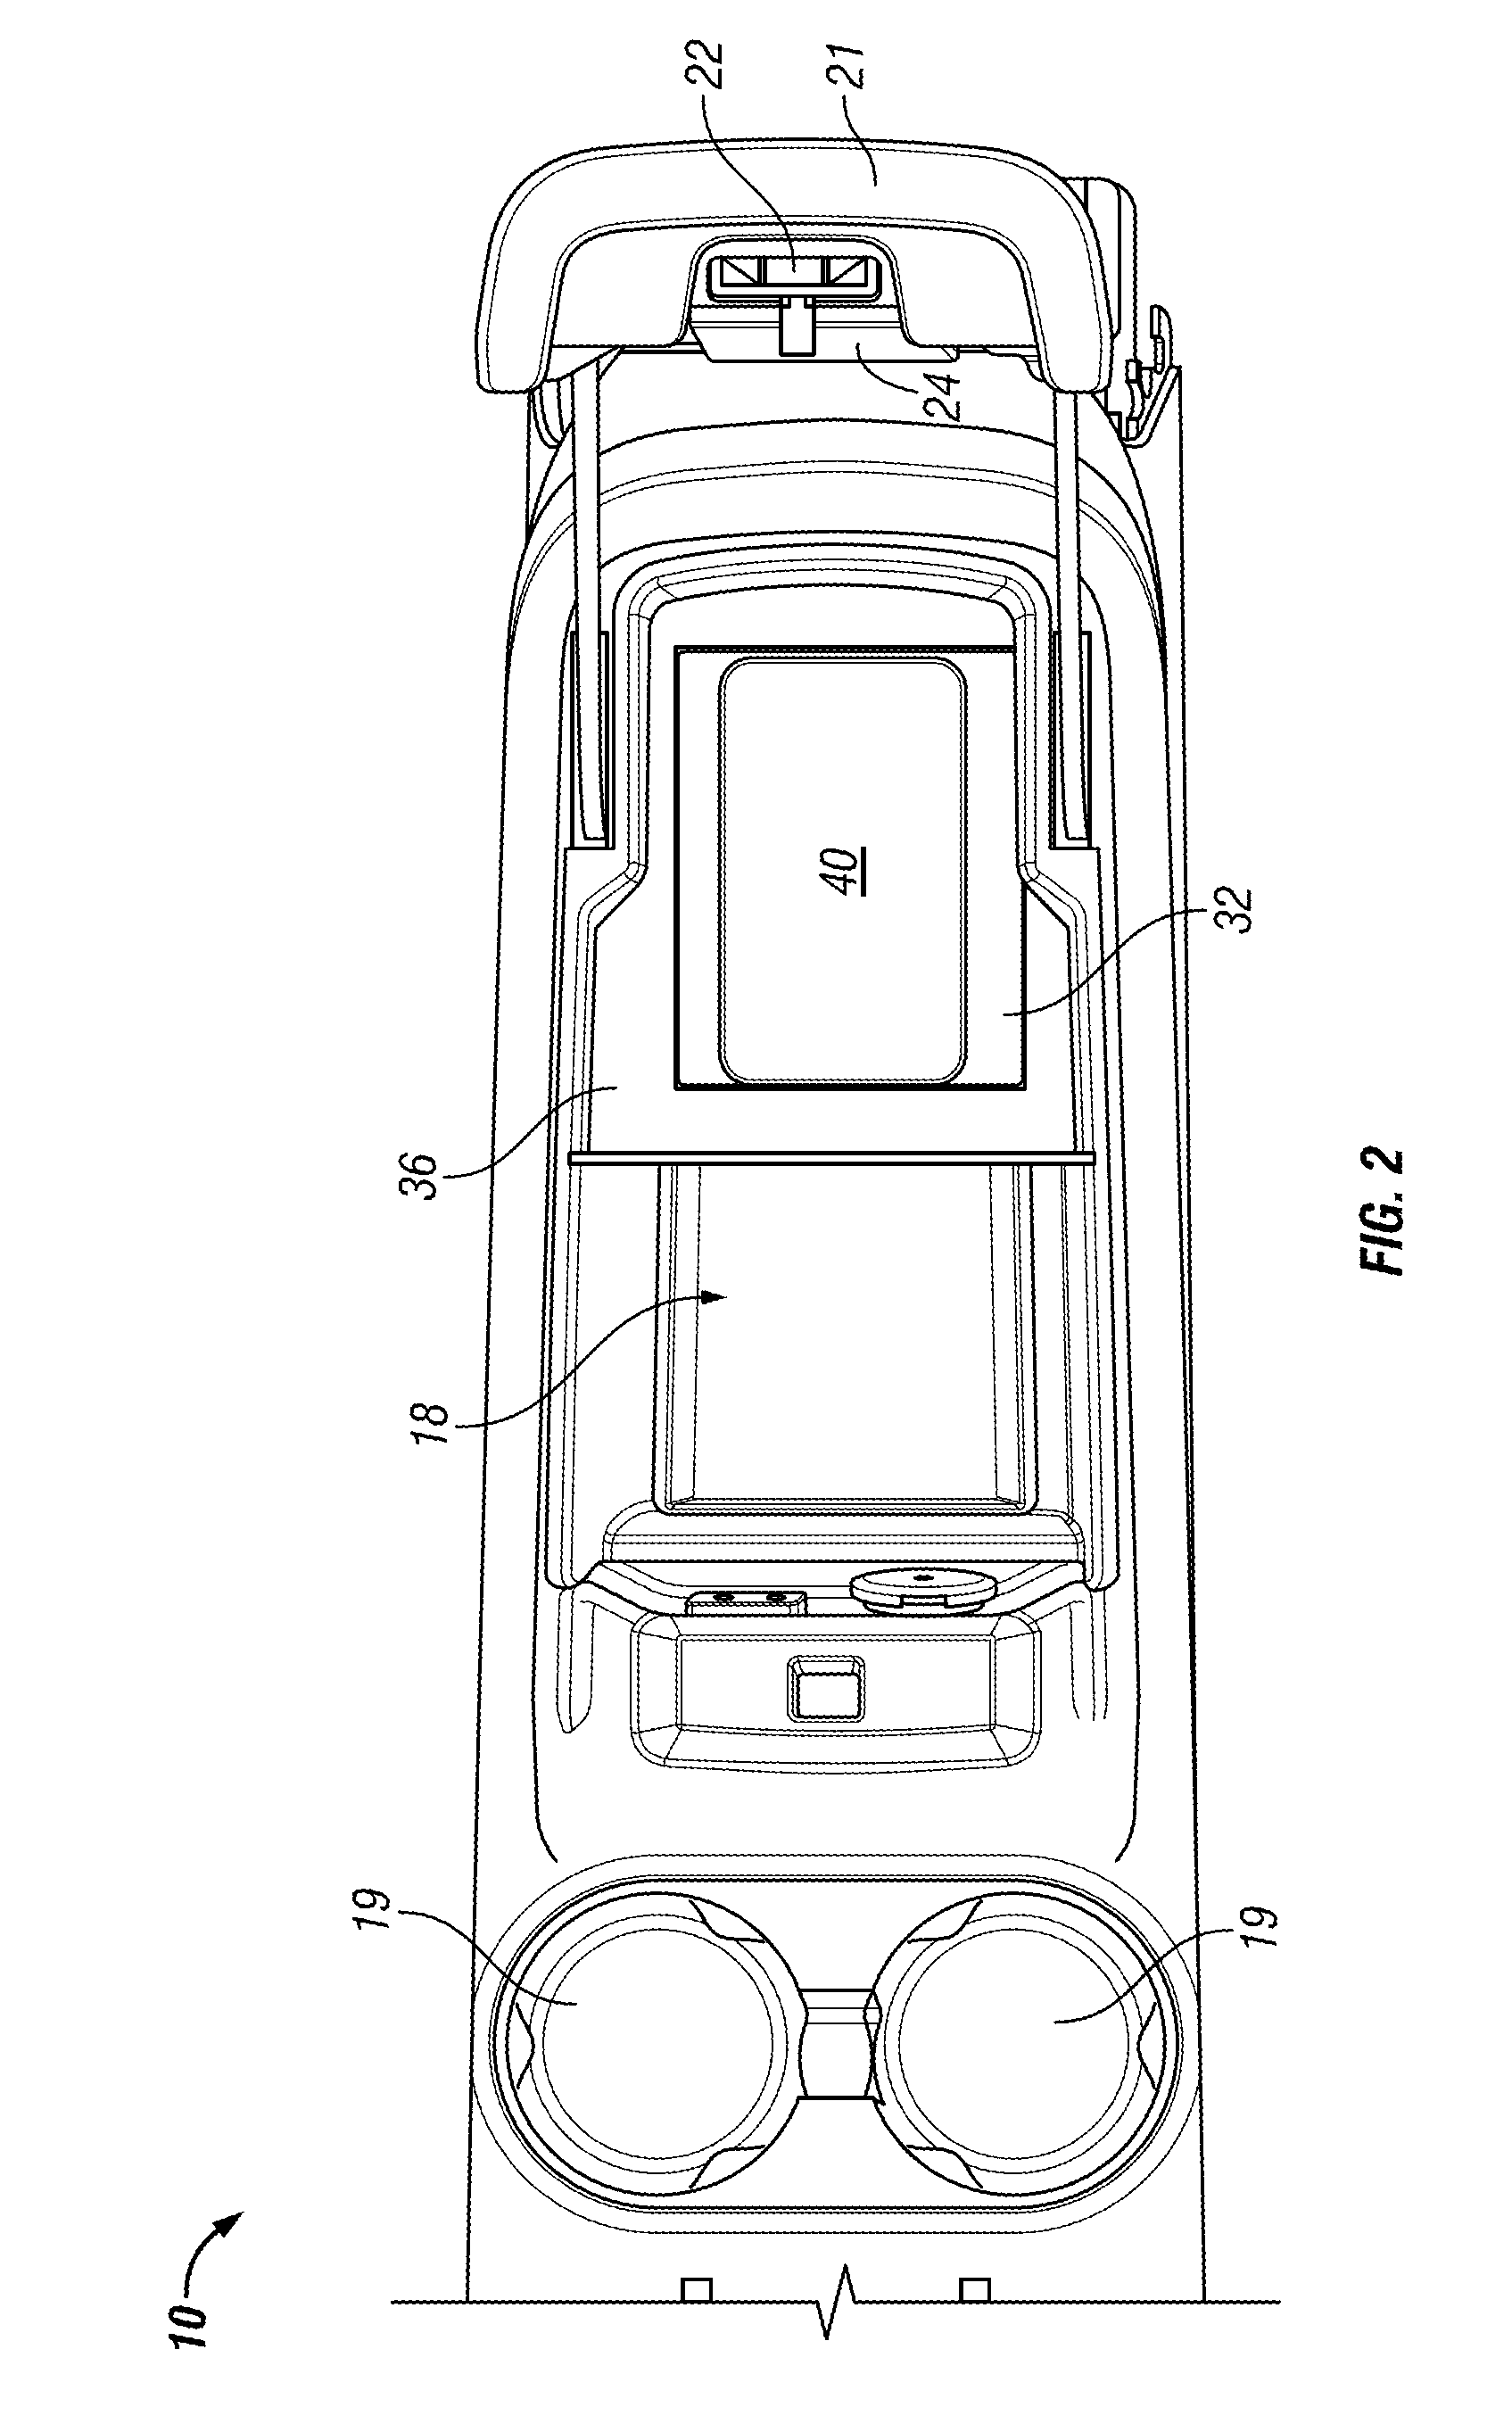 Wireless battery charging apparatus mounted in a vehcle designed to reduce electromagnetic interference